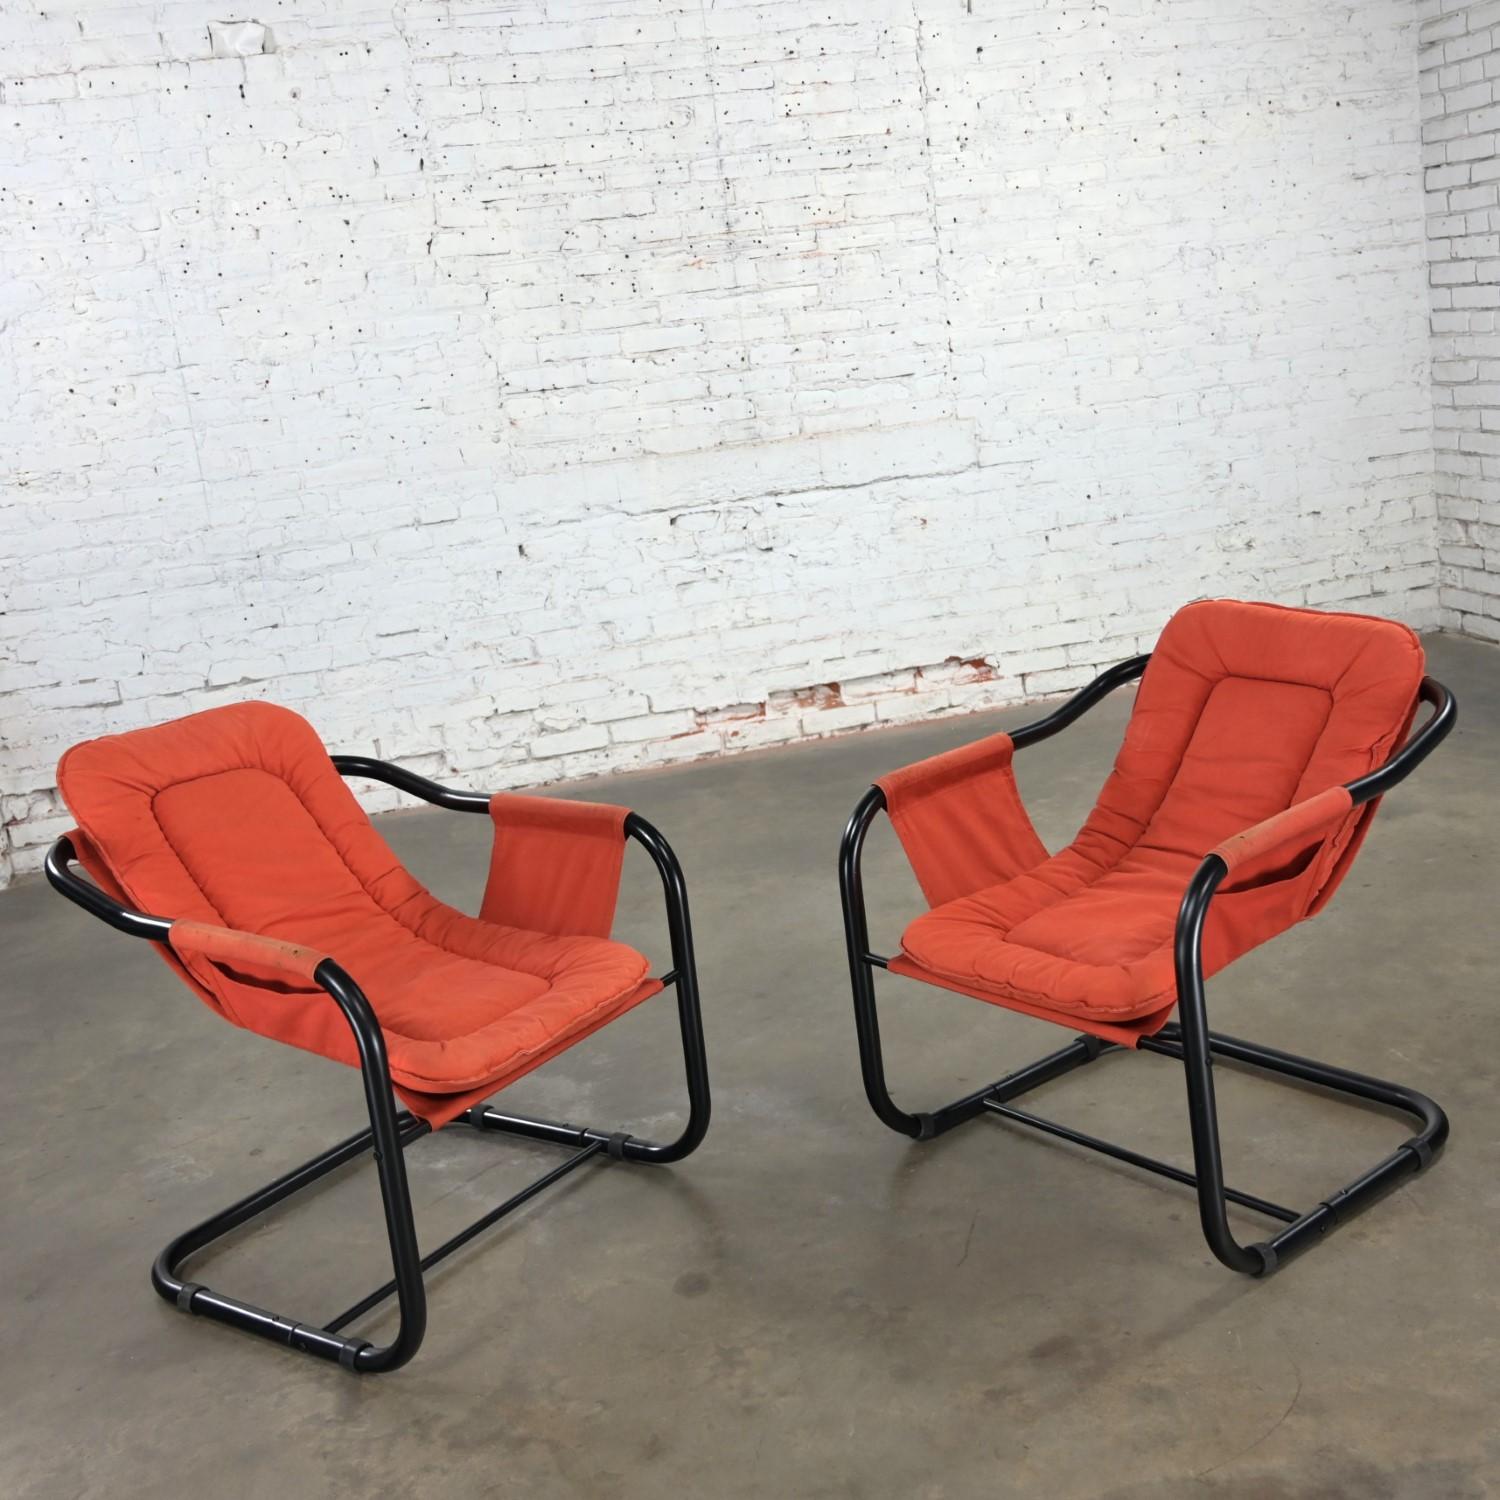 1970’s Modern Orange & Black Tube Cantilever Sling Lounge Chairs Jerry Johnson S For Sale 2